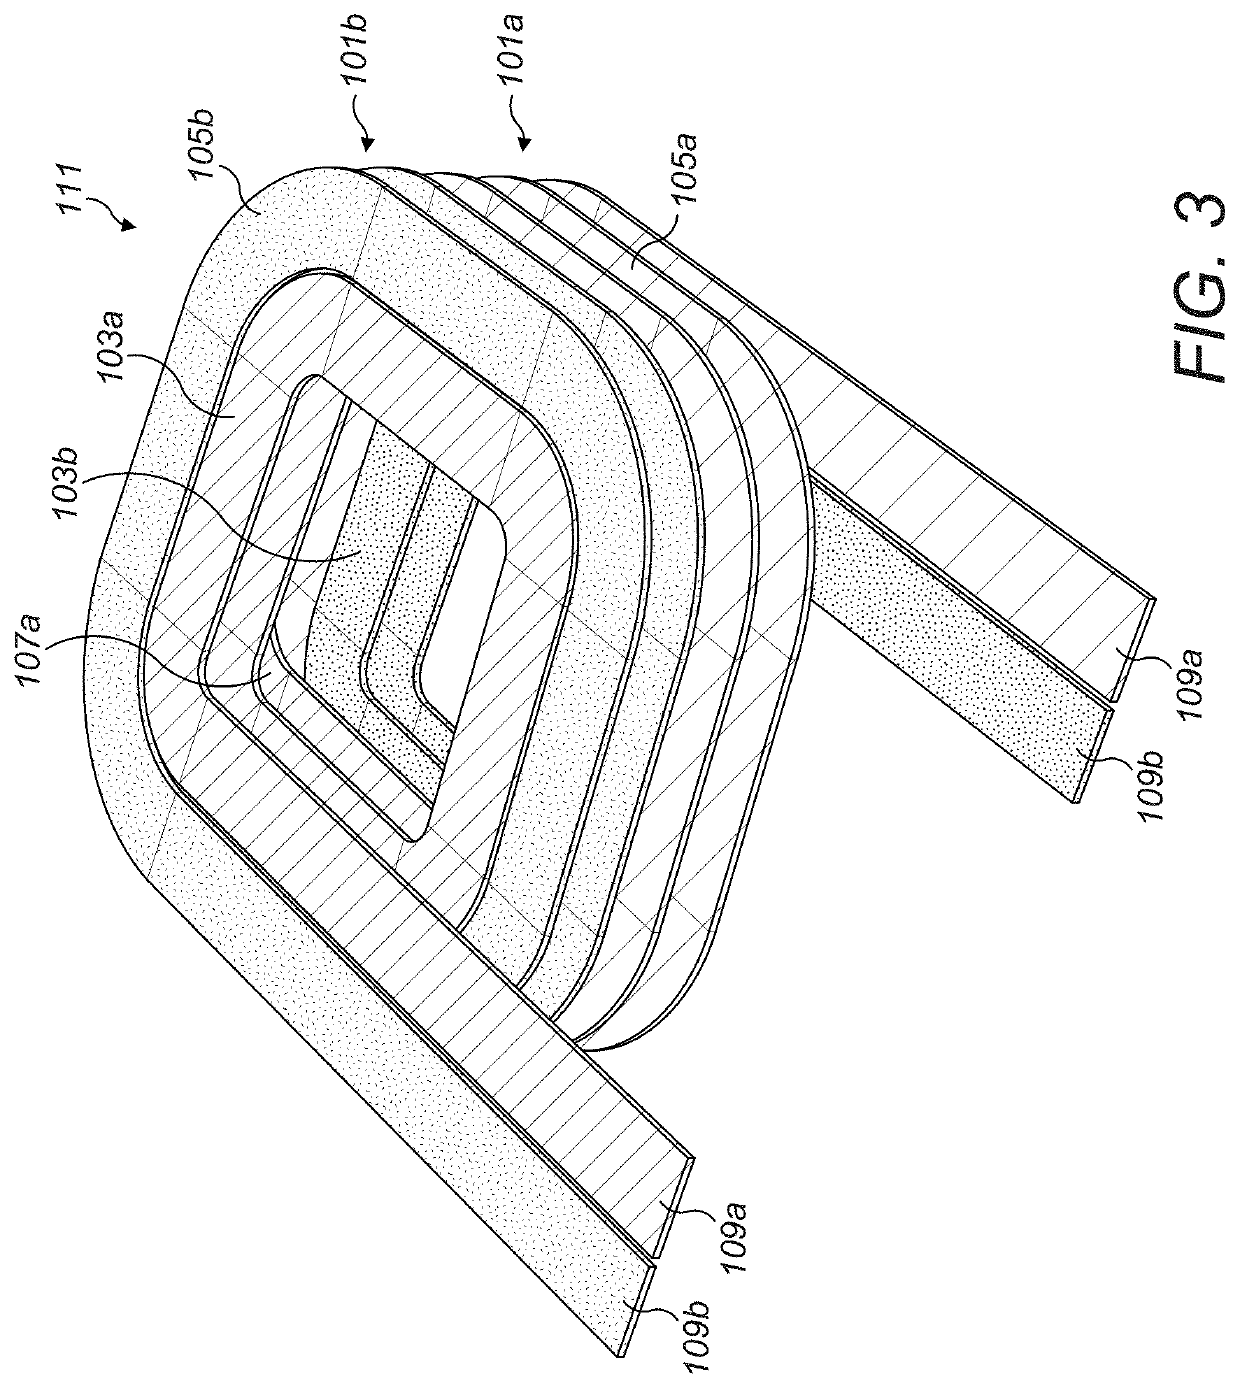 Winding arrangement for use in magnetic devices